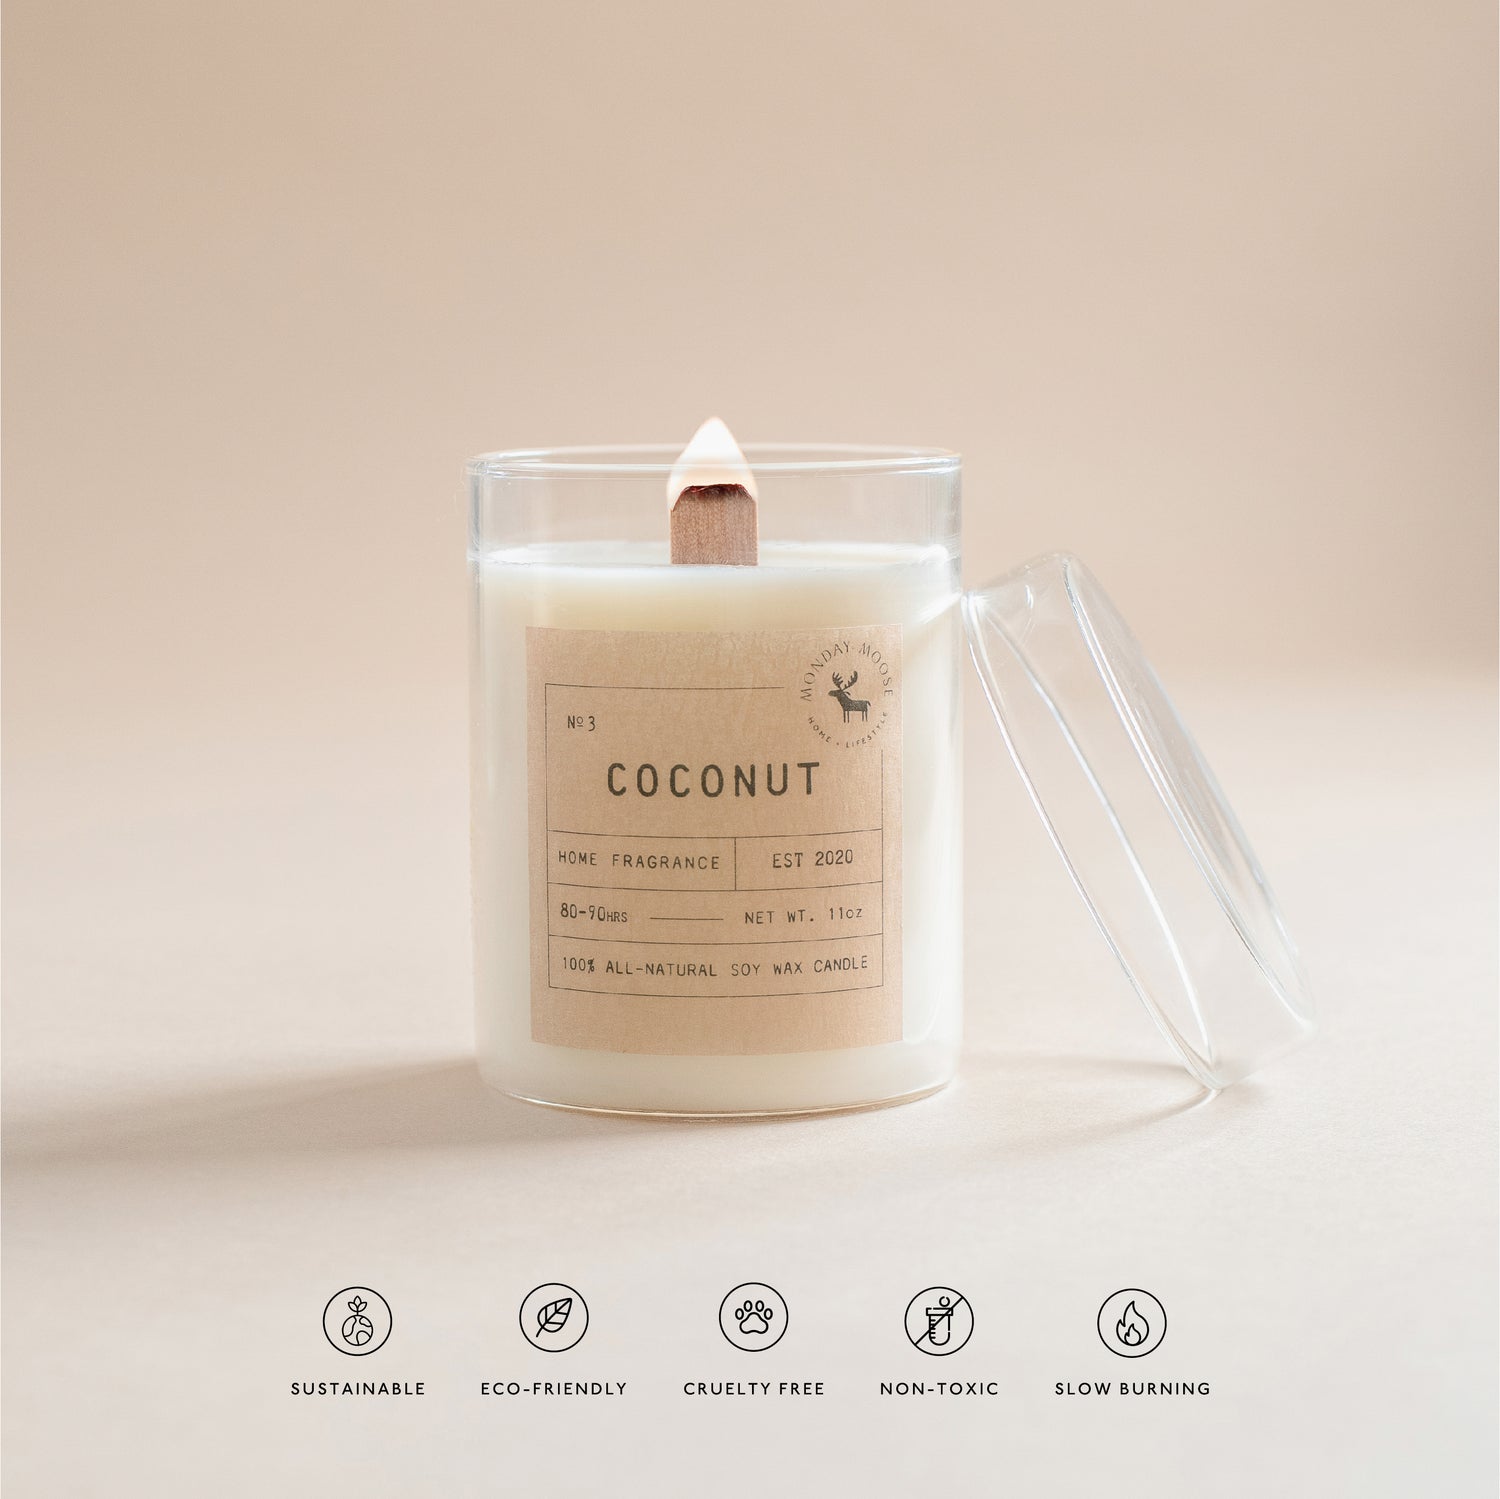 soy wax scented candle home fragrance coconut